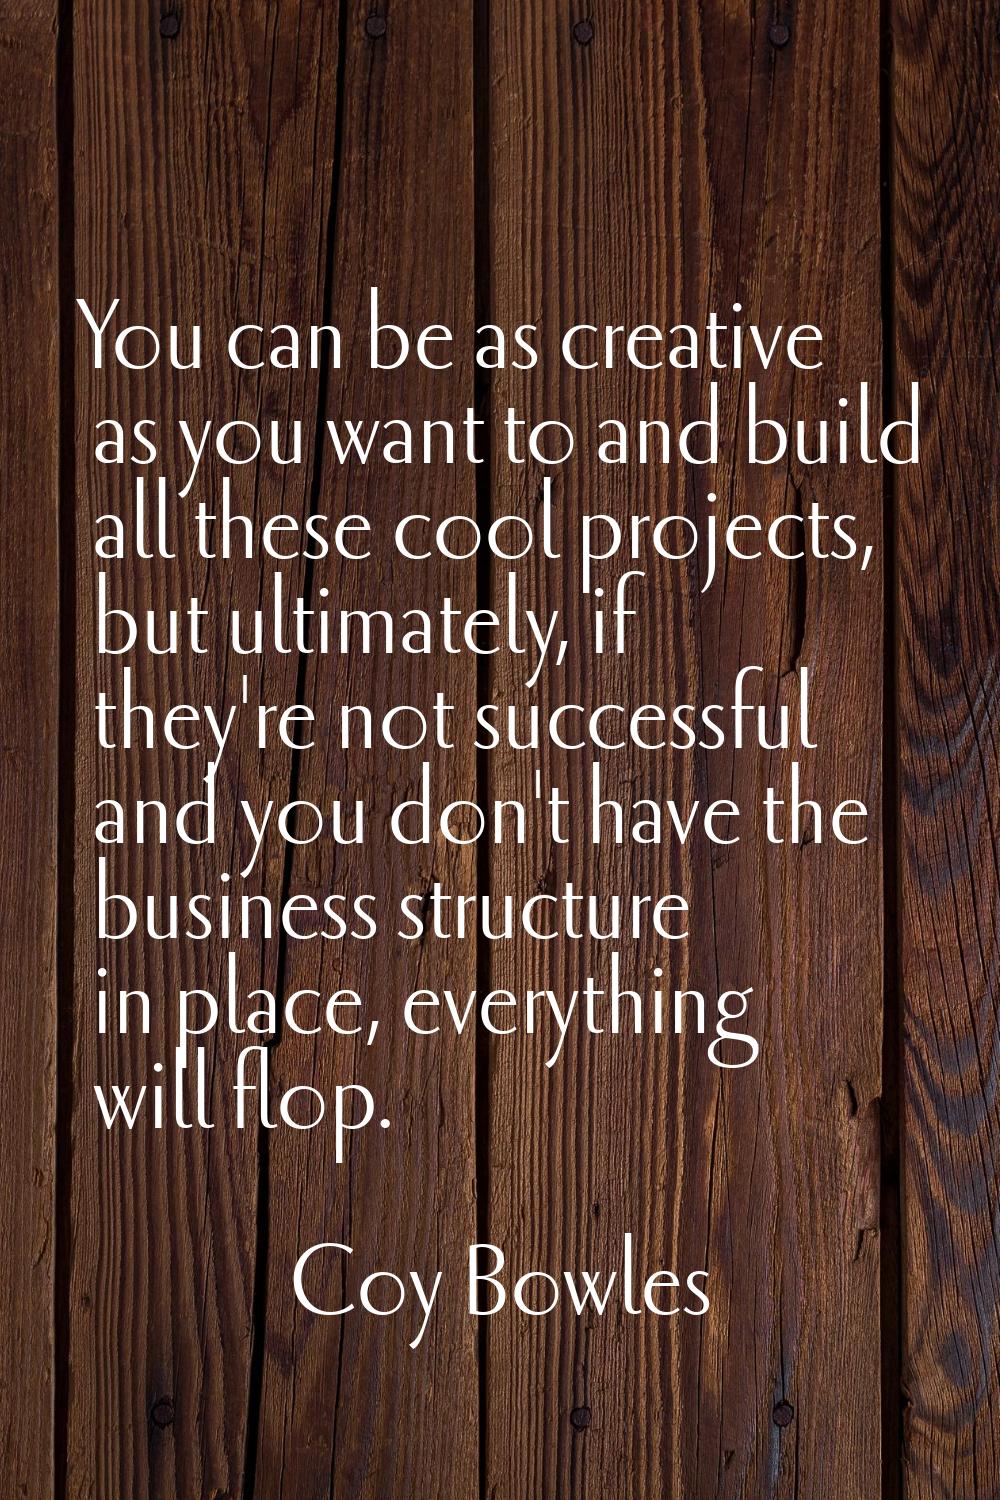 You can be as creative as you want to and build all these cool projects, but ultimately, if they're